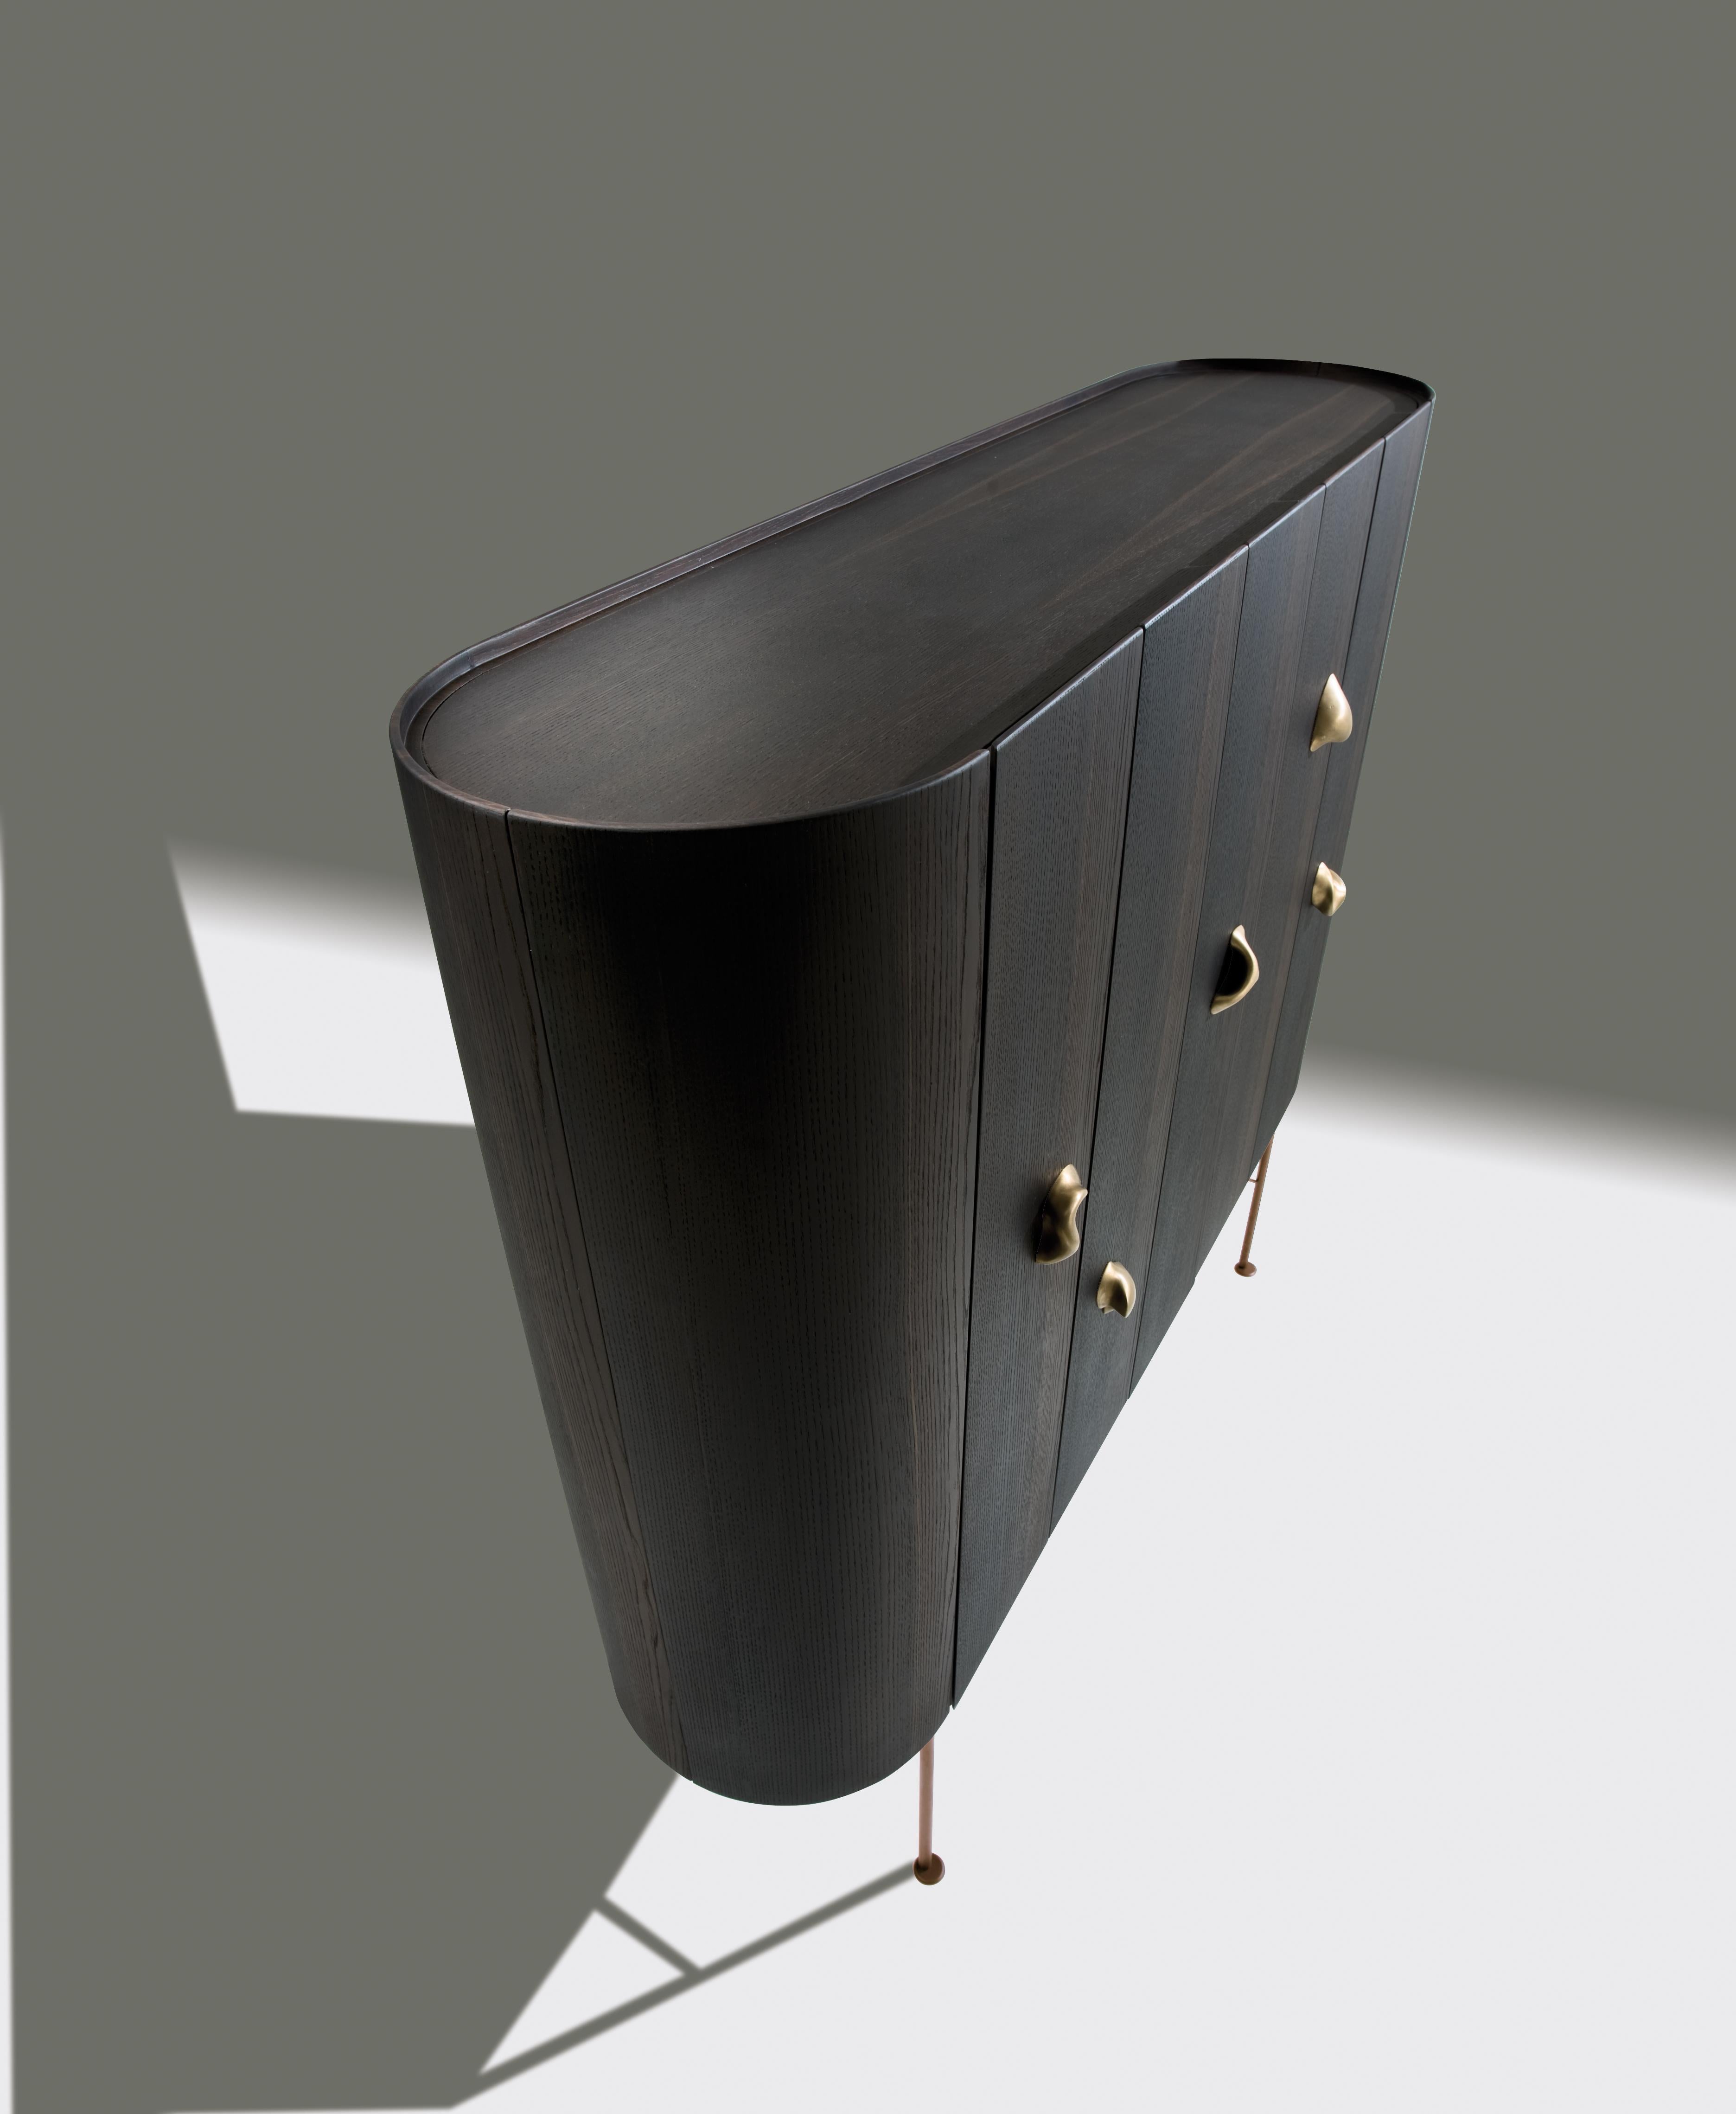 Storage unit in Siberian Ash wood with 7 hinged doors and curved sides. Satin brass base and 5 Sesel collection handles in cast bronze. Internally equipped with 8 drawers and shelves.

Collectionist design is inspired by the 